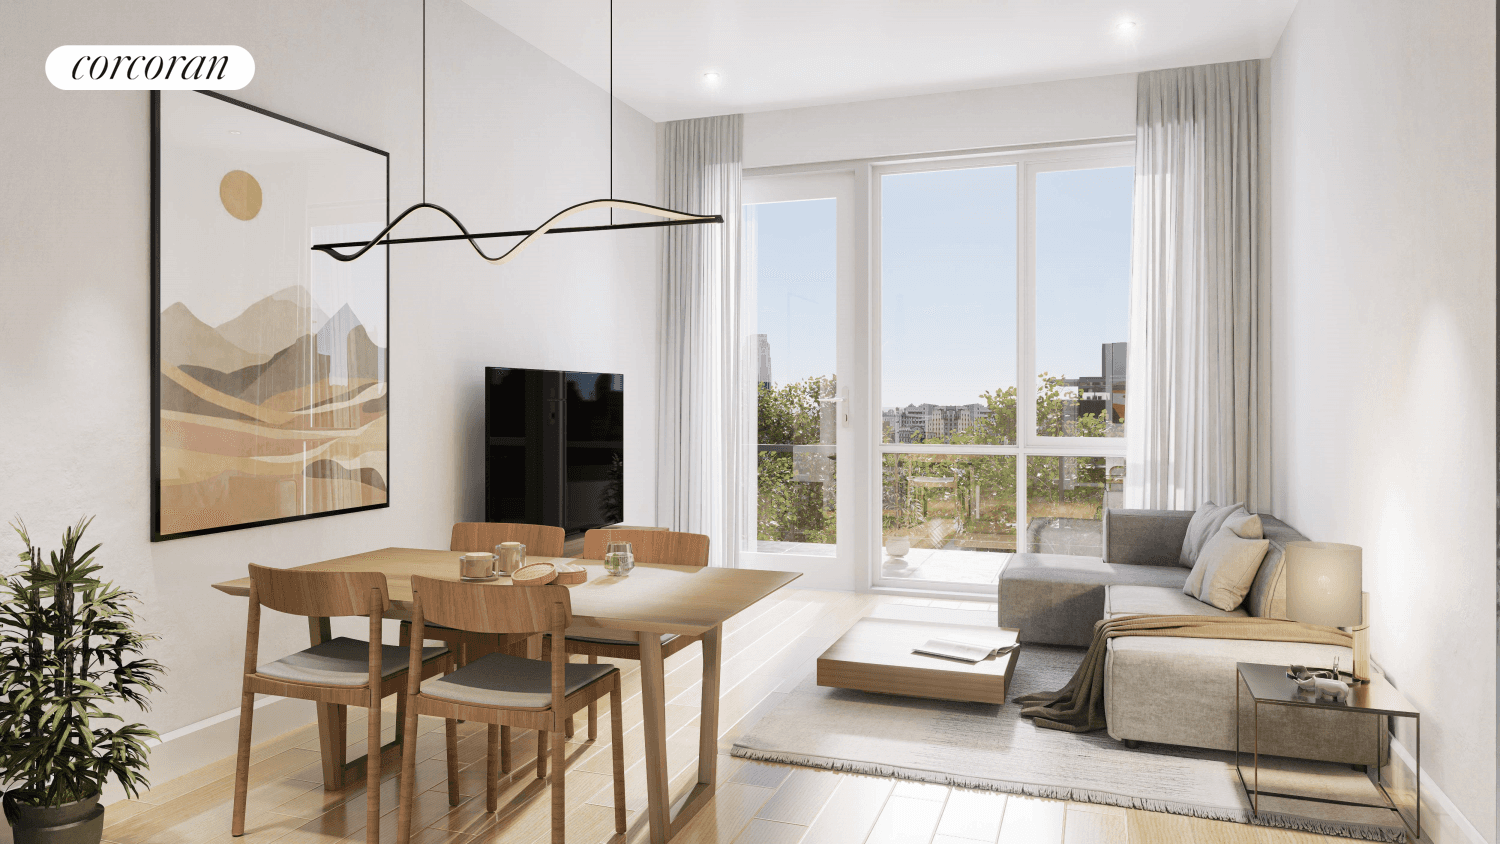 Bathed in sunlight and perfectly at home in Prospect Lefferts Gardens, The Rogers Residences is the first in a new generation of luxury condominiums.